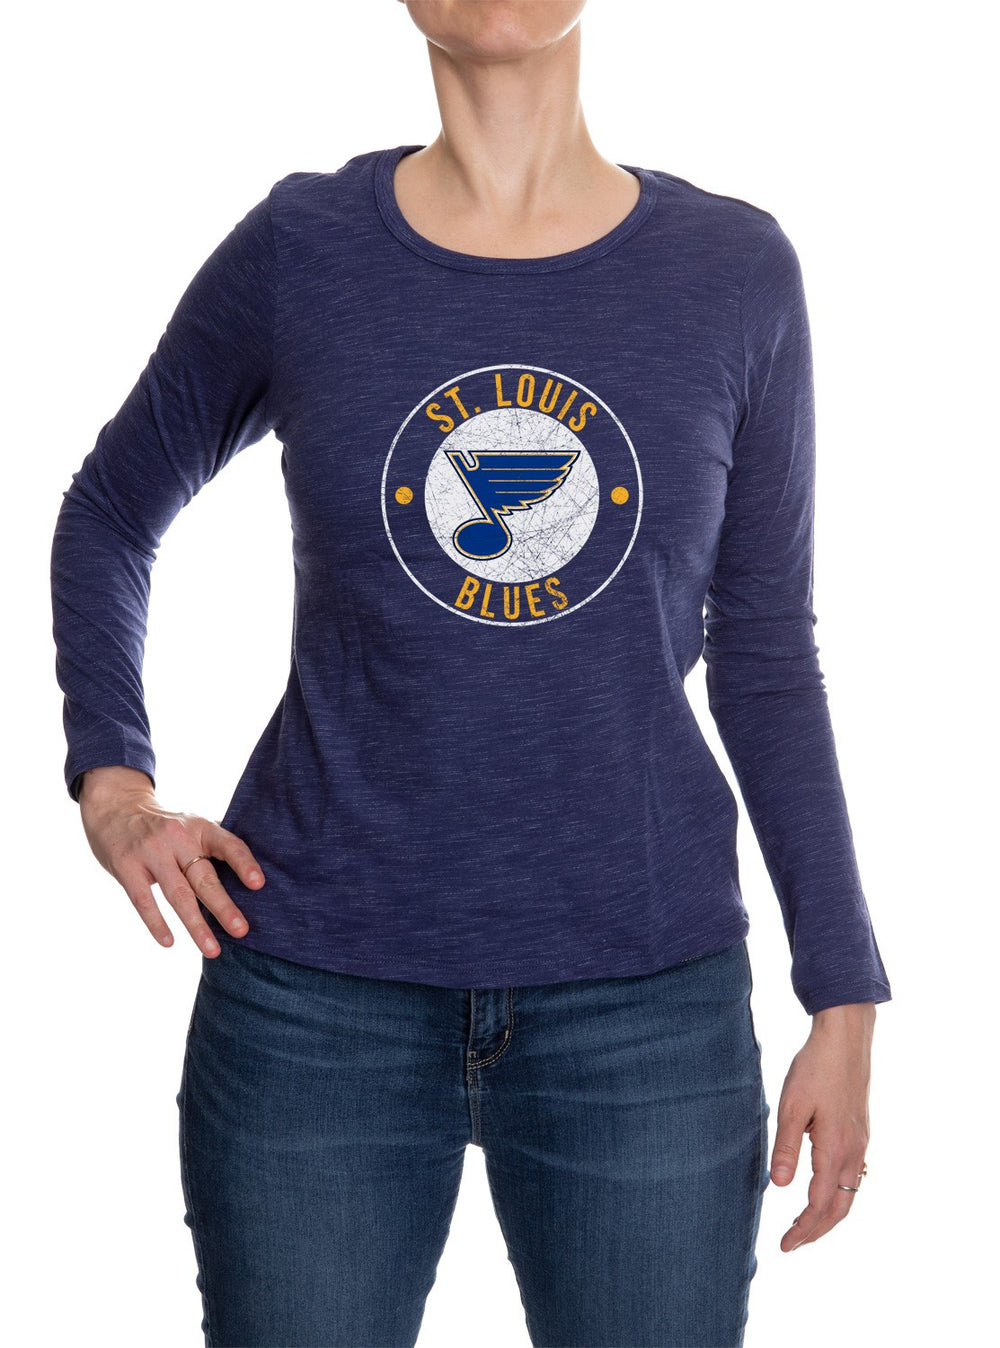 Levelwear St Louis Blues Navy Blue Thrive Fashion Hood, Navy Blue, 50% Polyester / 25% Cotton / 25% Rayon, Size 2XL, Rally House